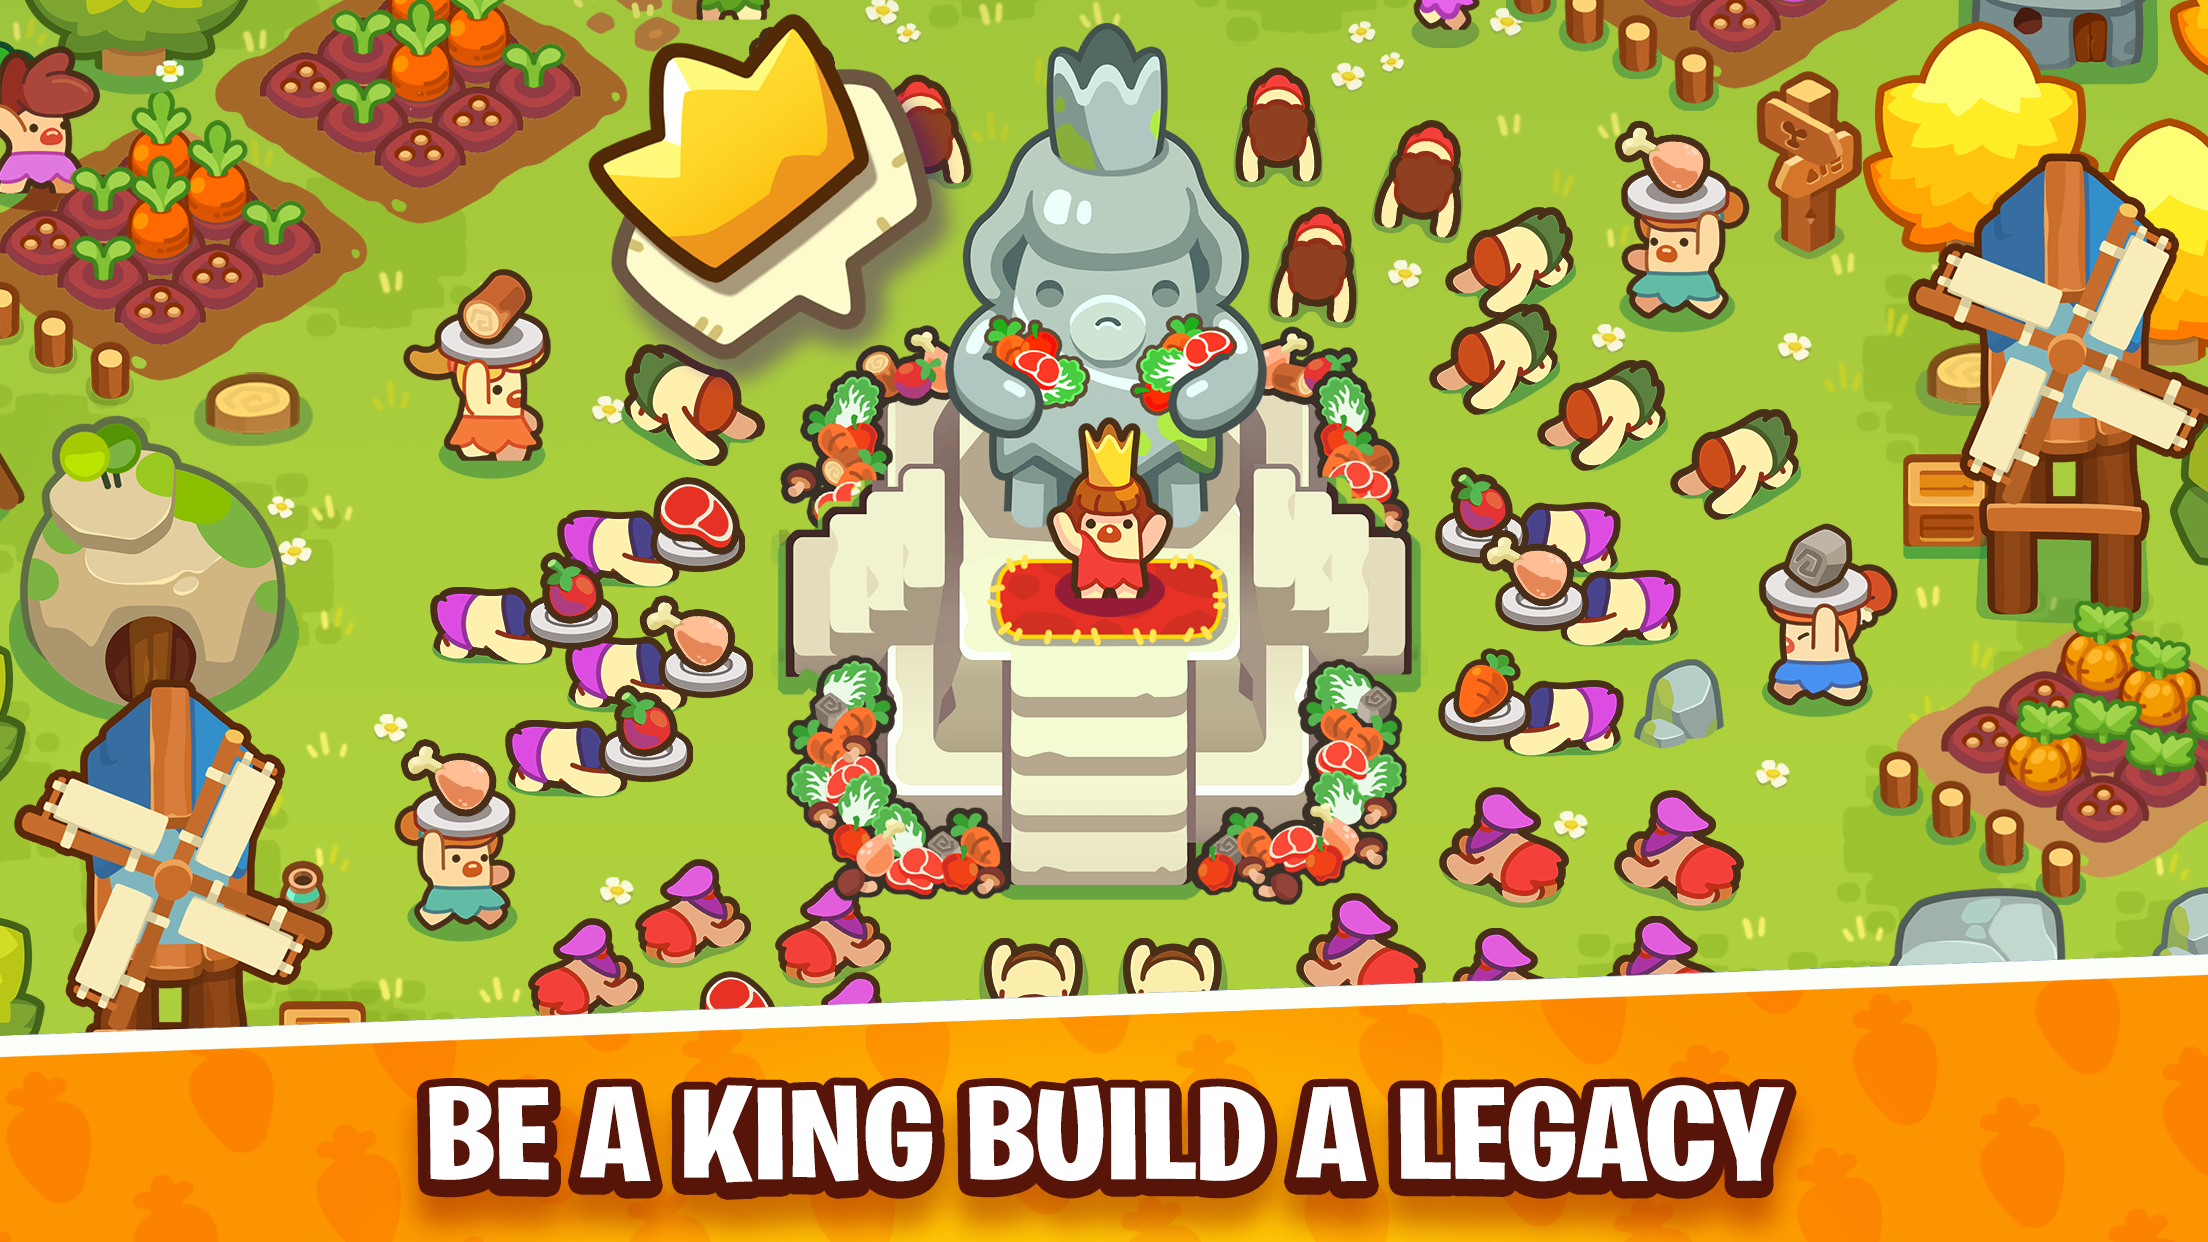 Me is King Mod Apk (Unlimited Resources, No ADS)